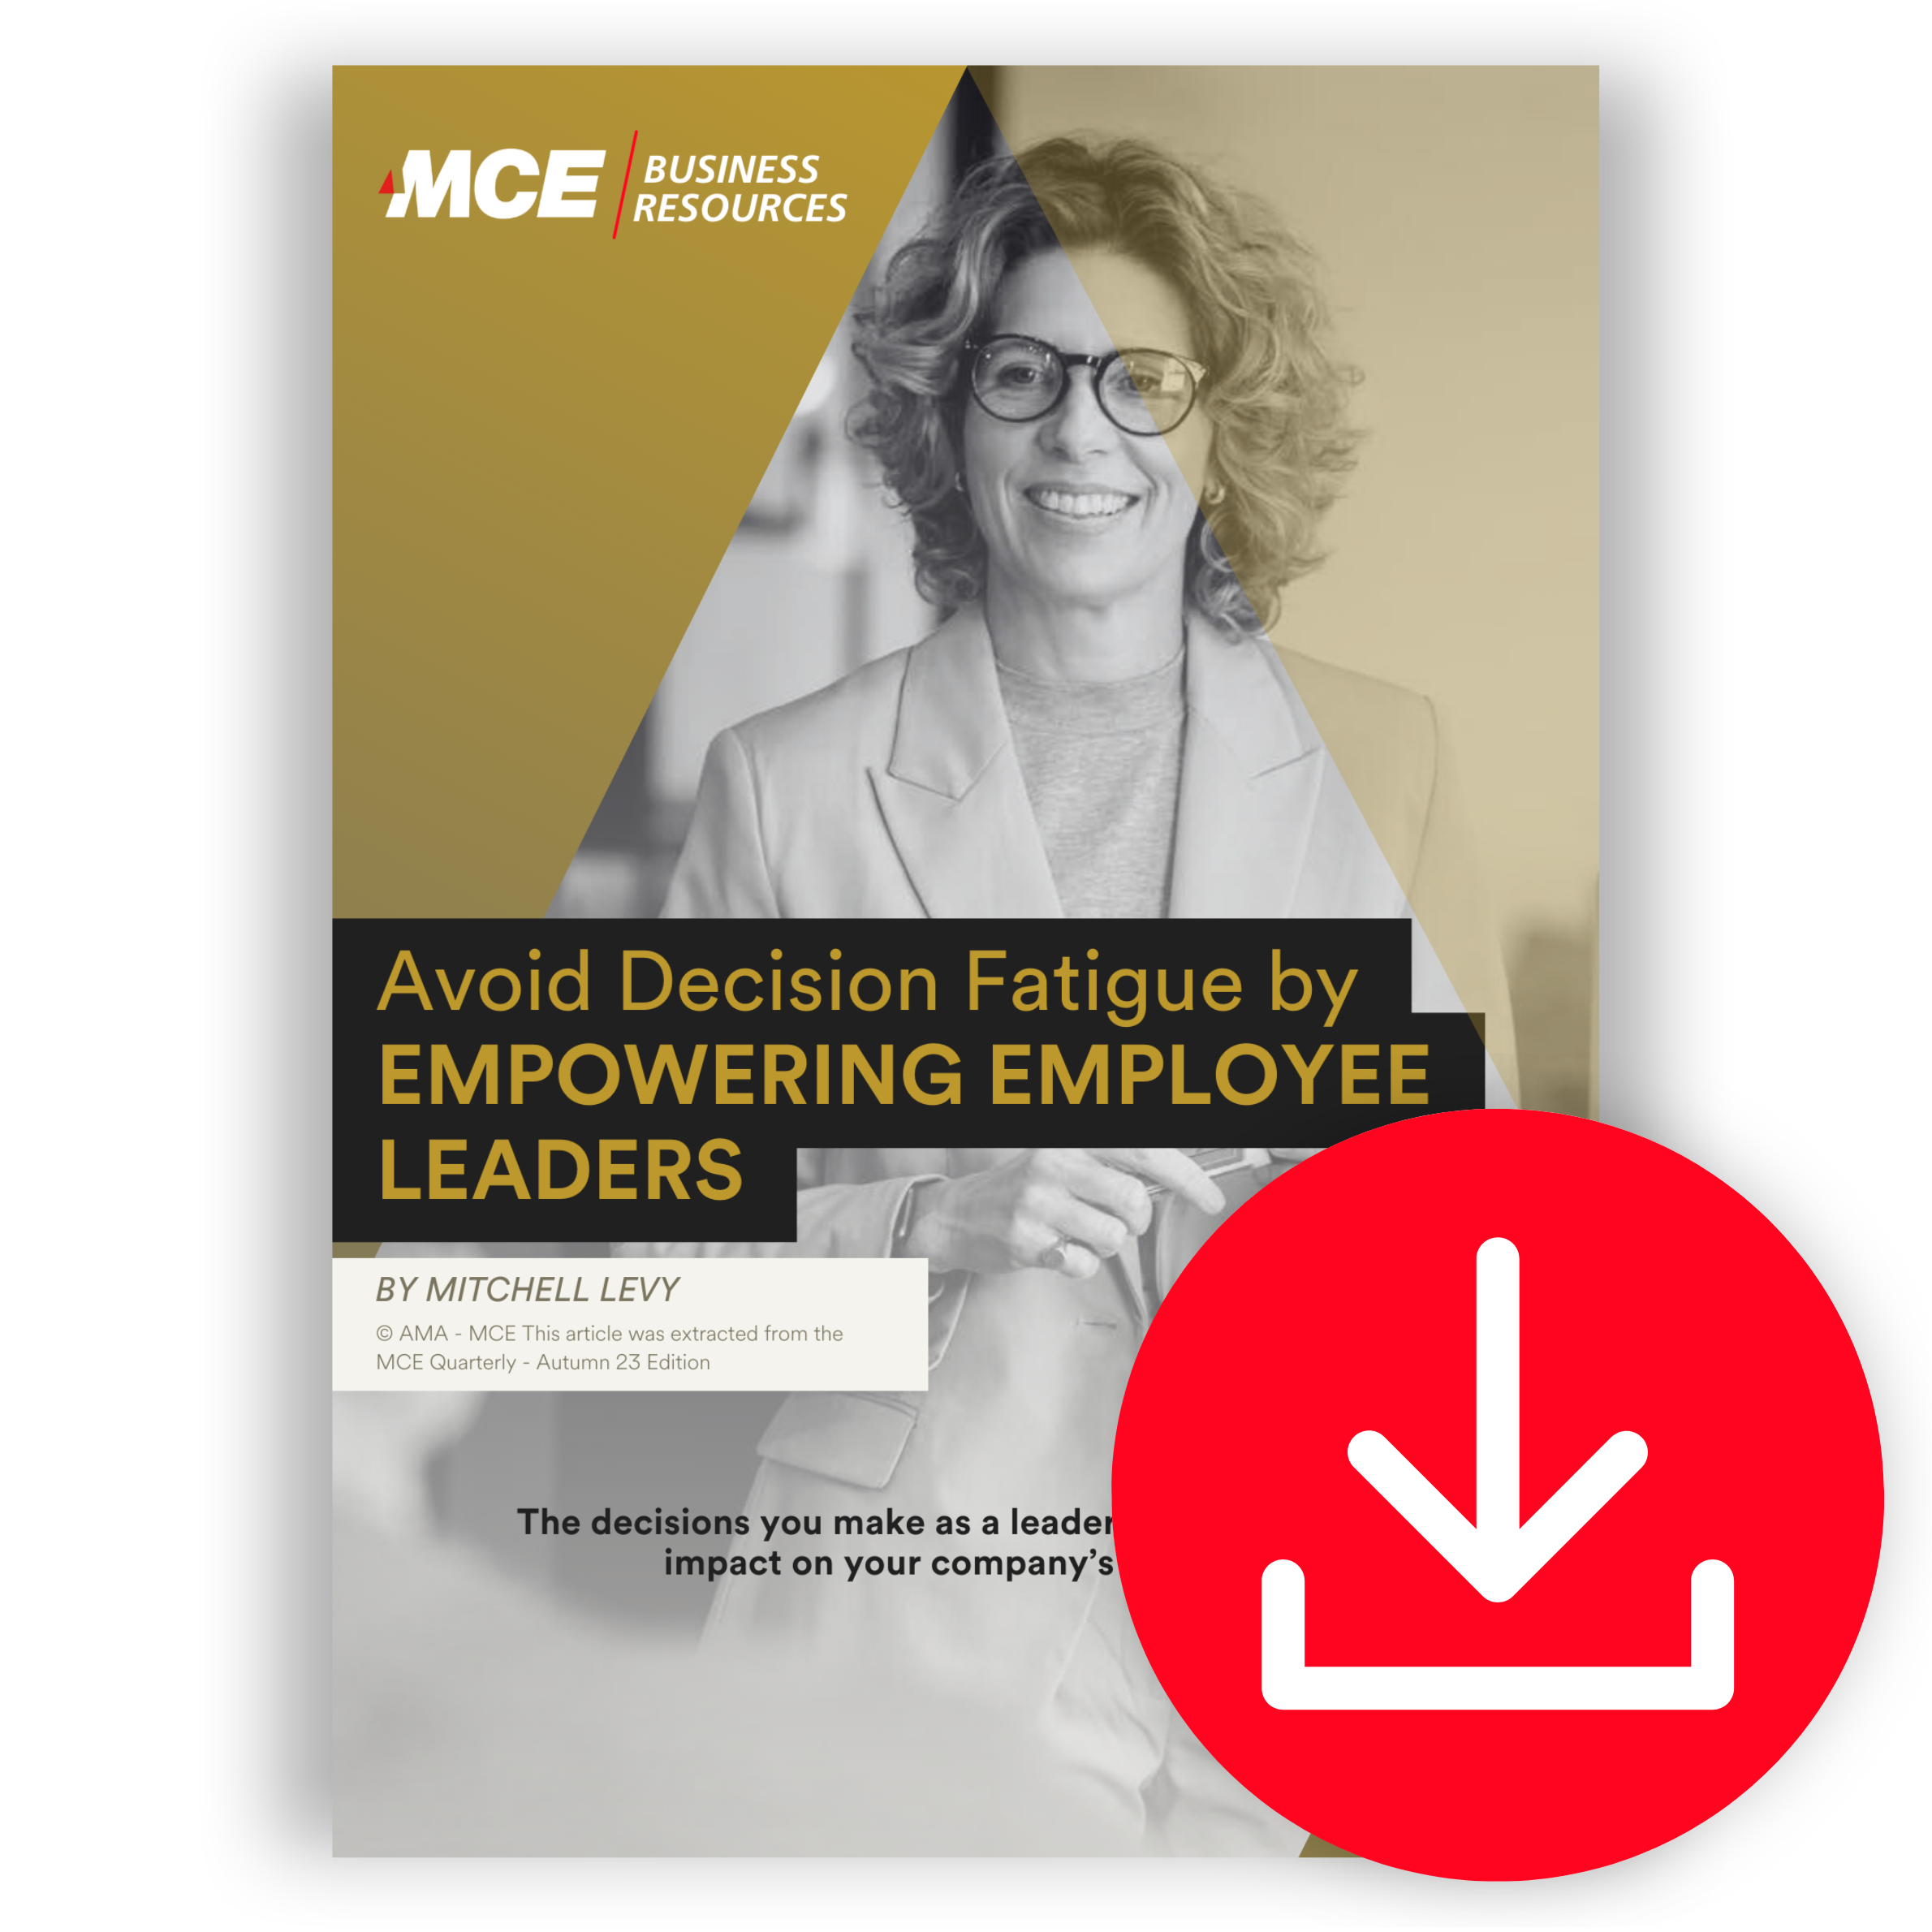 Avoid Decision Fatigue by EMPOWERING EMPLOYEE LEADERS